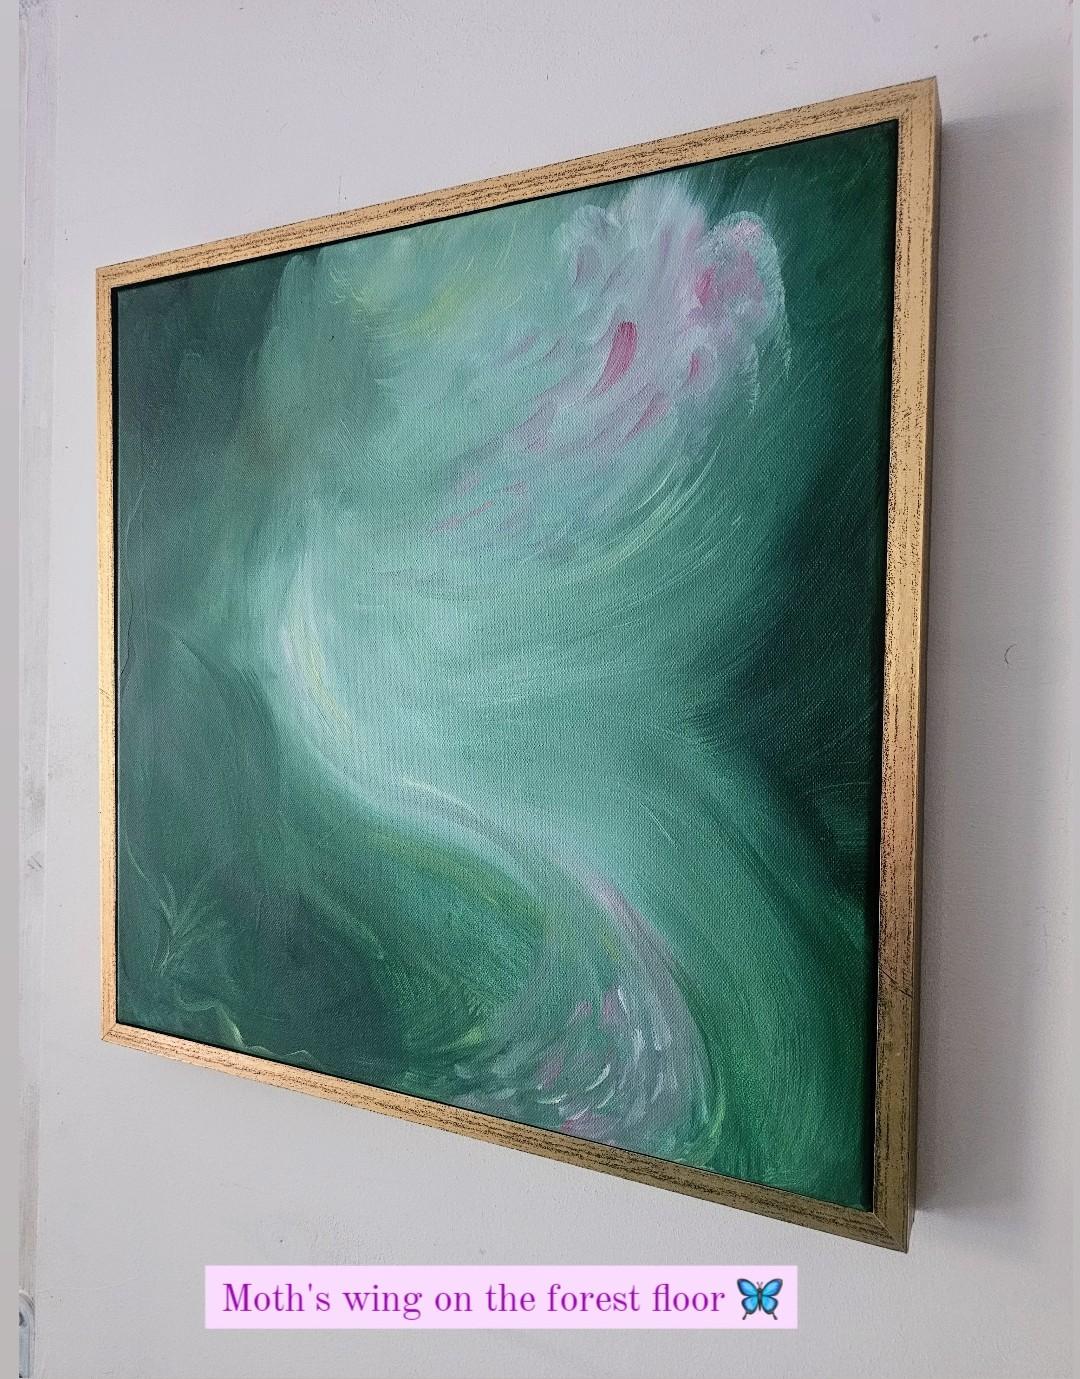 Moth's wing on the forest floor - framed green abstract expressionist painting - Abstract Expressionist Painting by Jennifer L. Baker